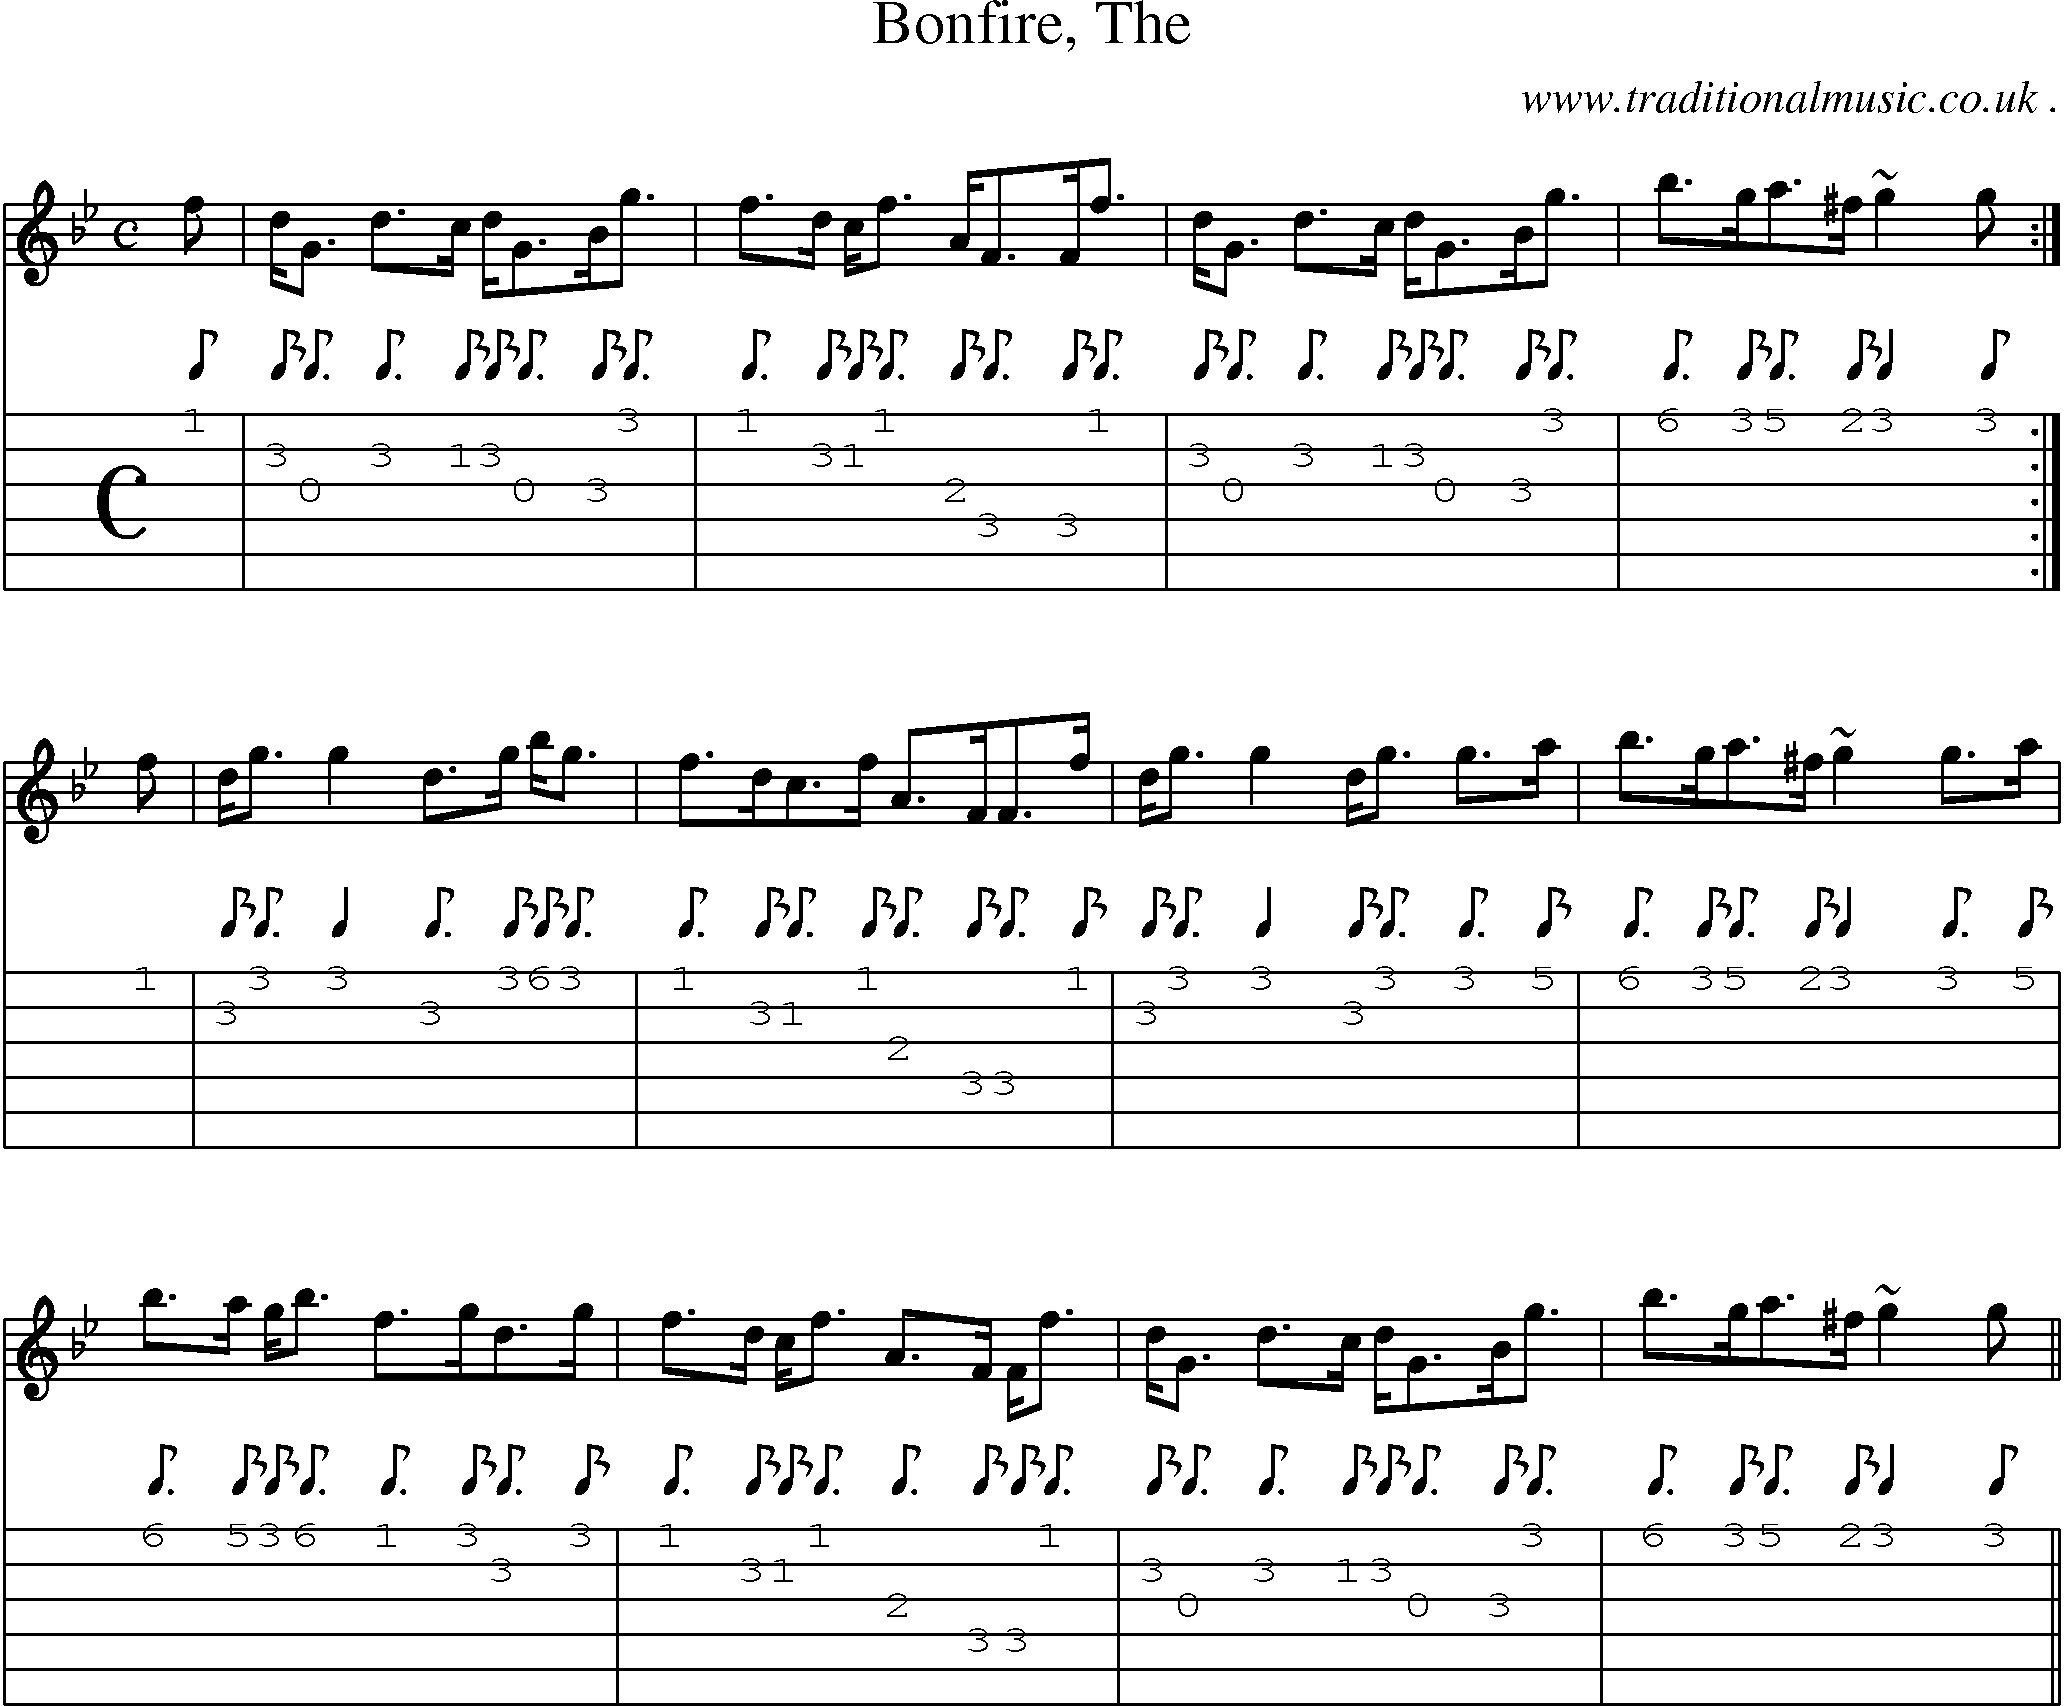 Sheet-music  score, Chords and Guitar Tabs for Bonfire The